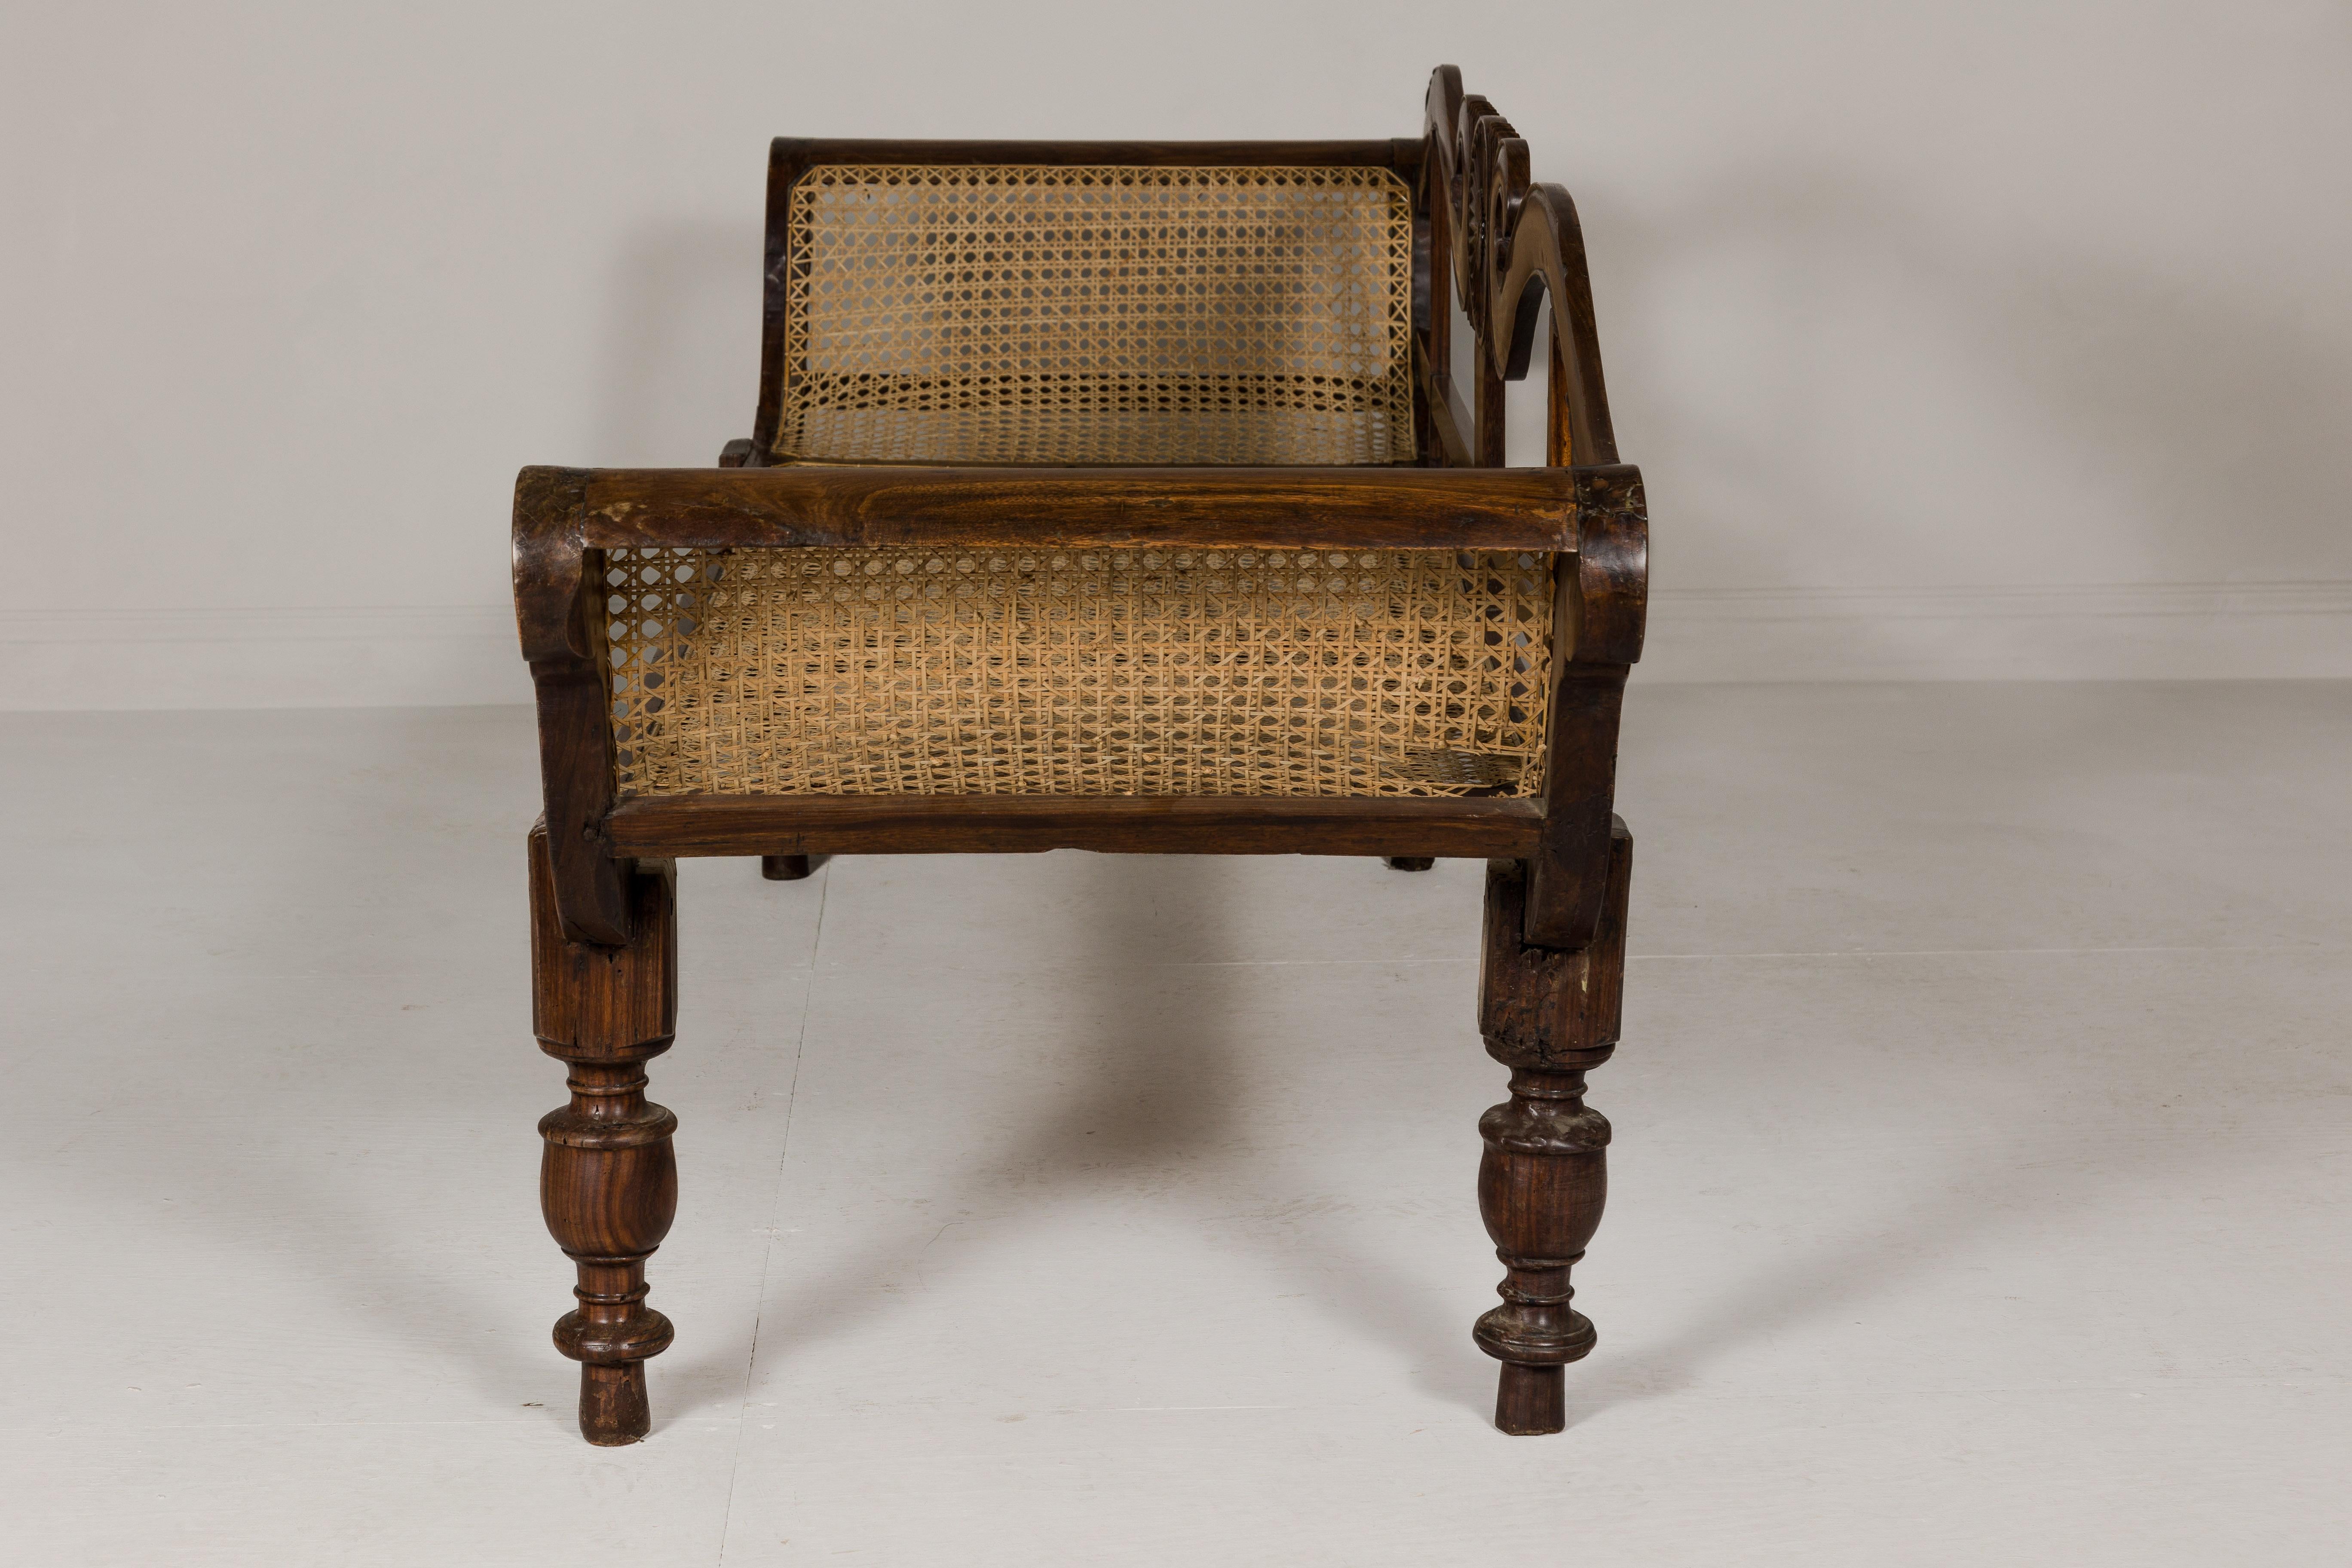 British Colonial Carved and Cane Settee with Swan Neck Back and Scrolling Arms For Sale 12